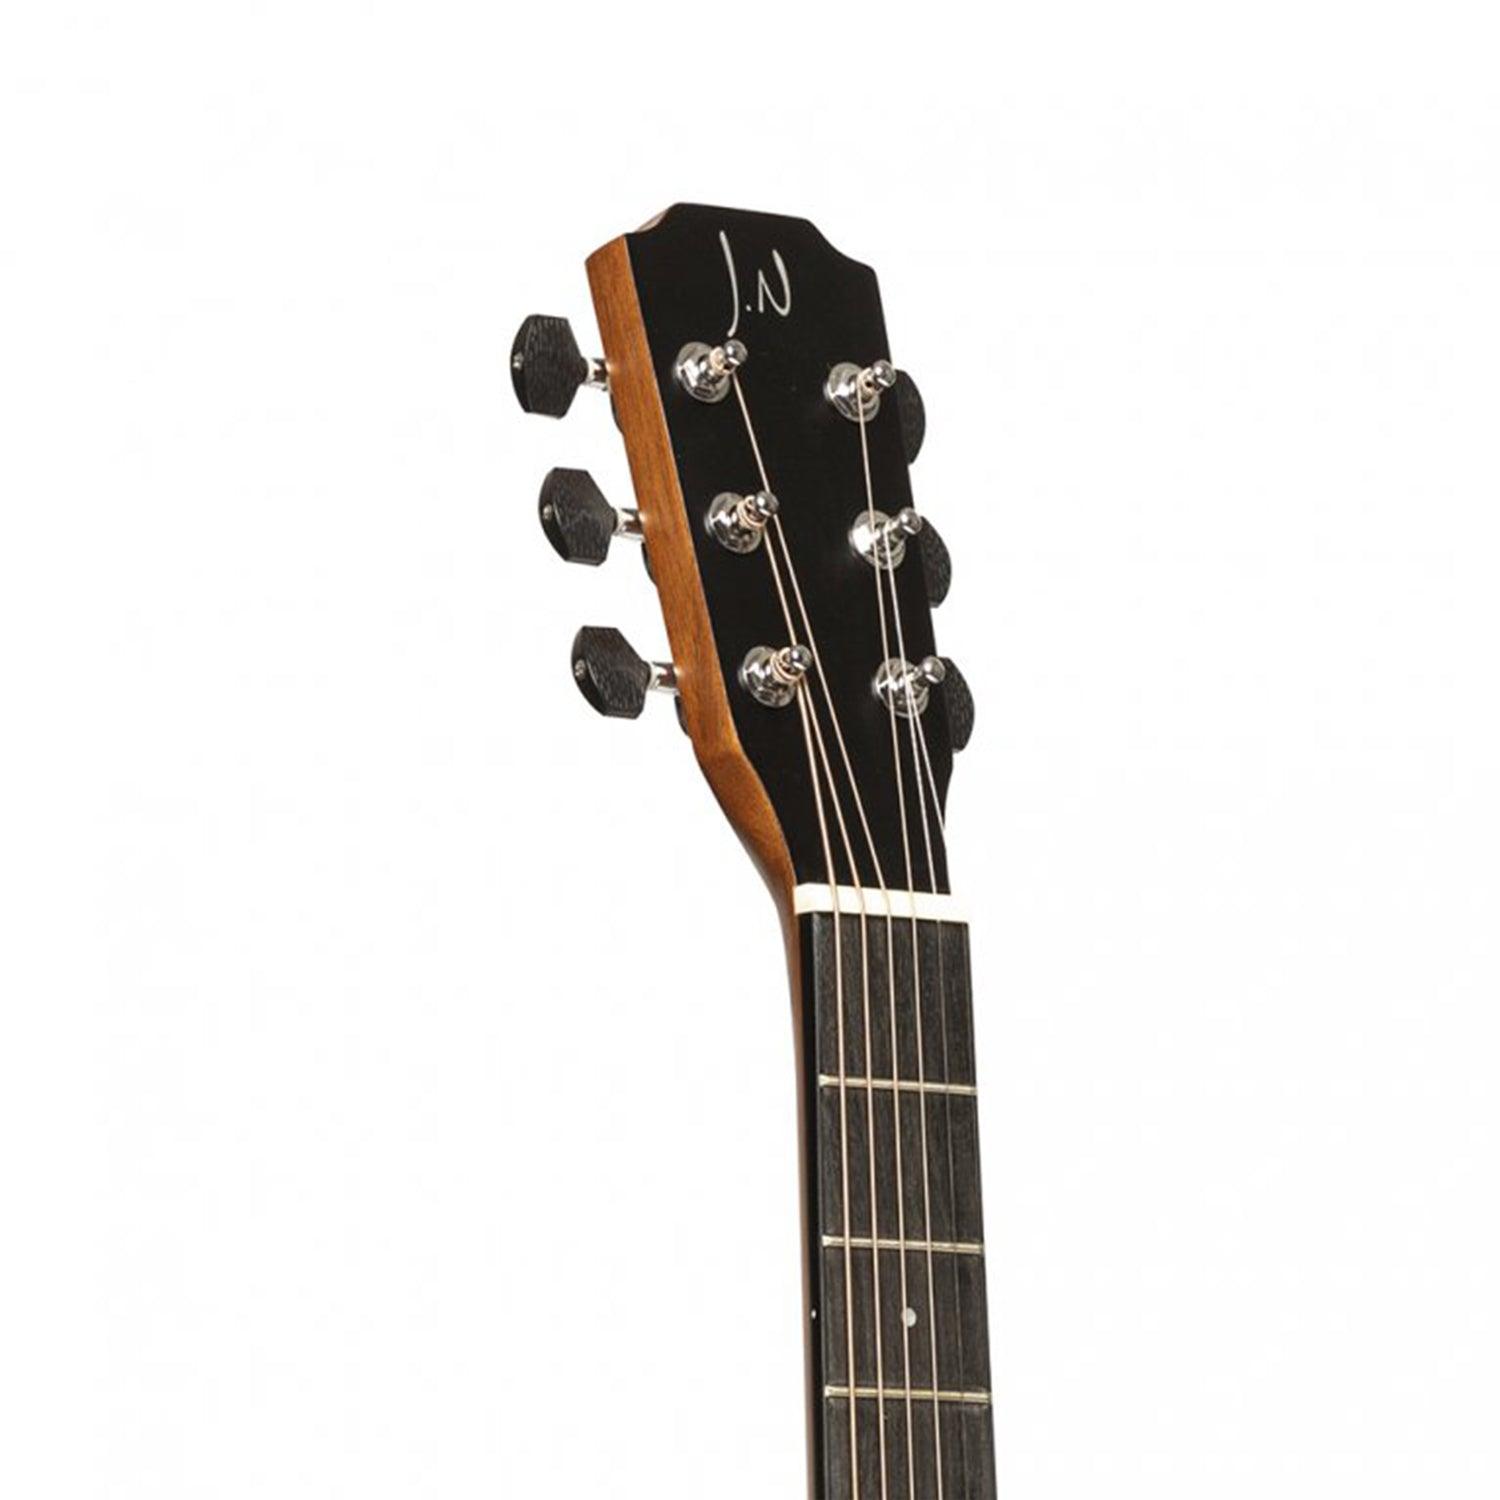 J.N Guitars GLEN-O N GLEN-O Orchestra Acoustic Guitar with Spruce Top, Glencairn series - DY Pro Audio